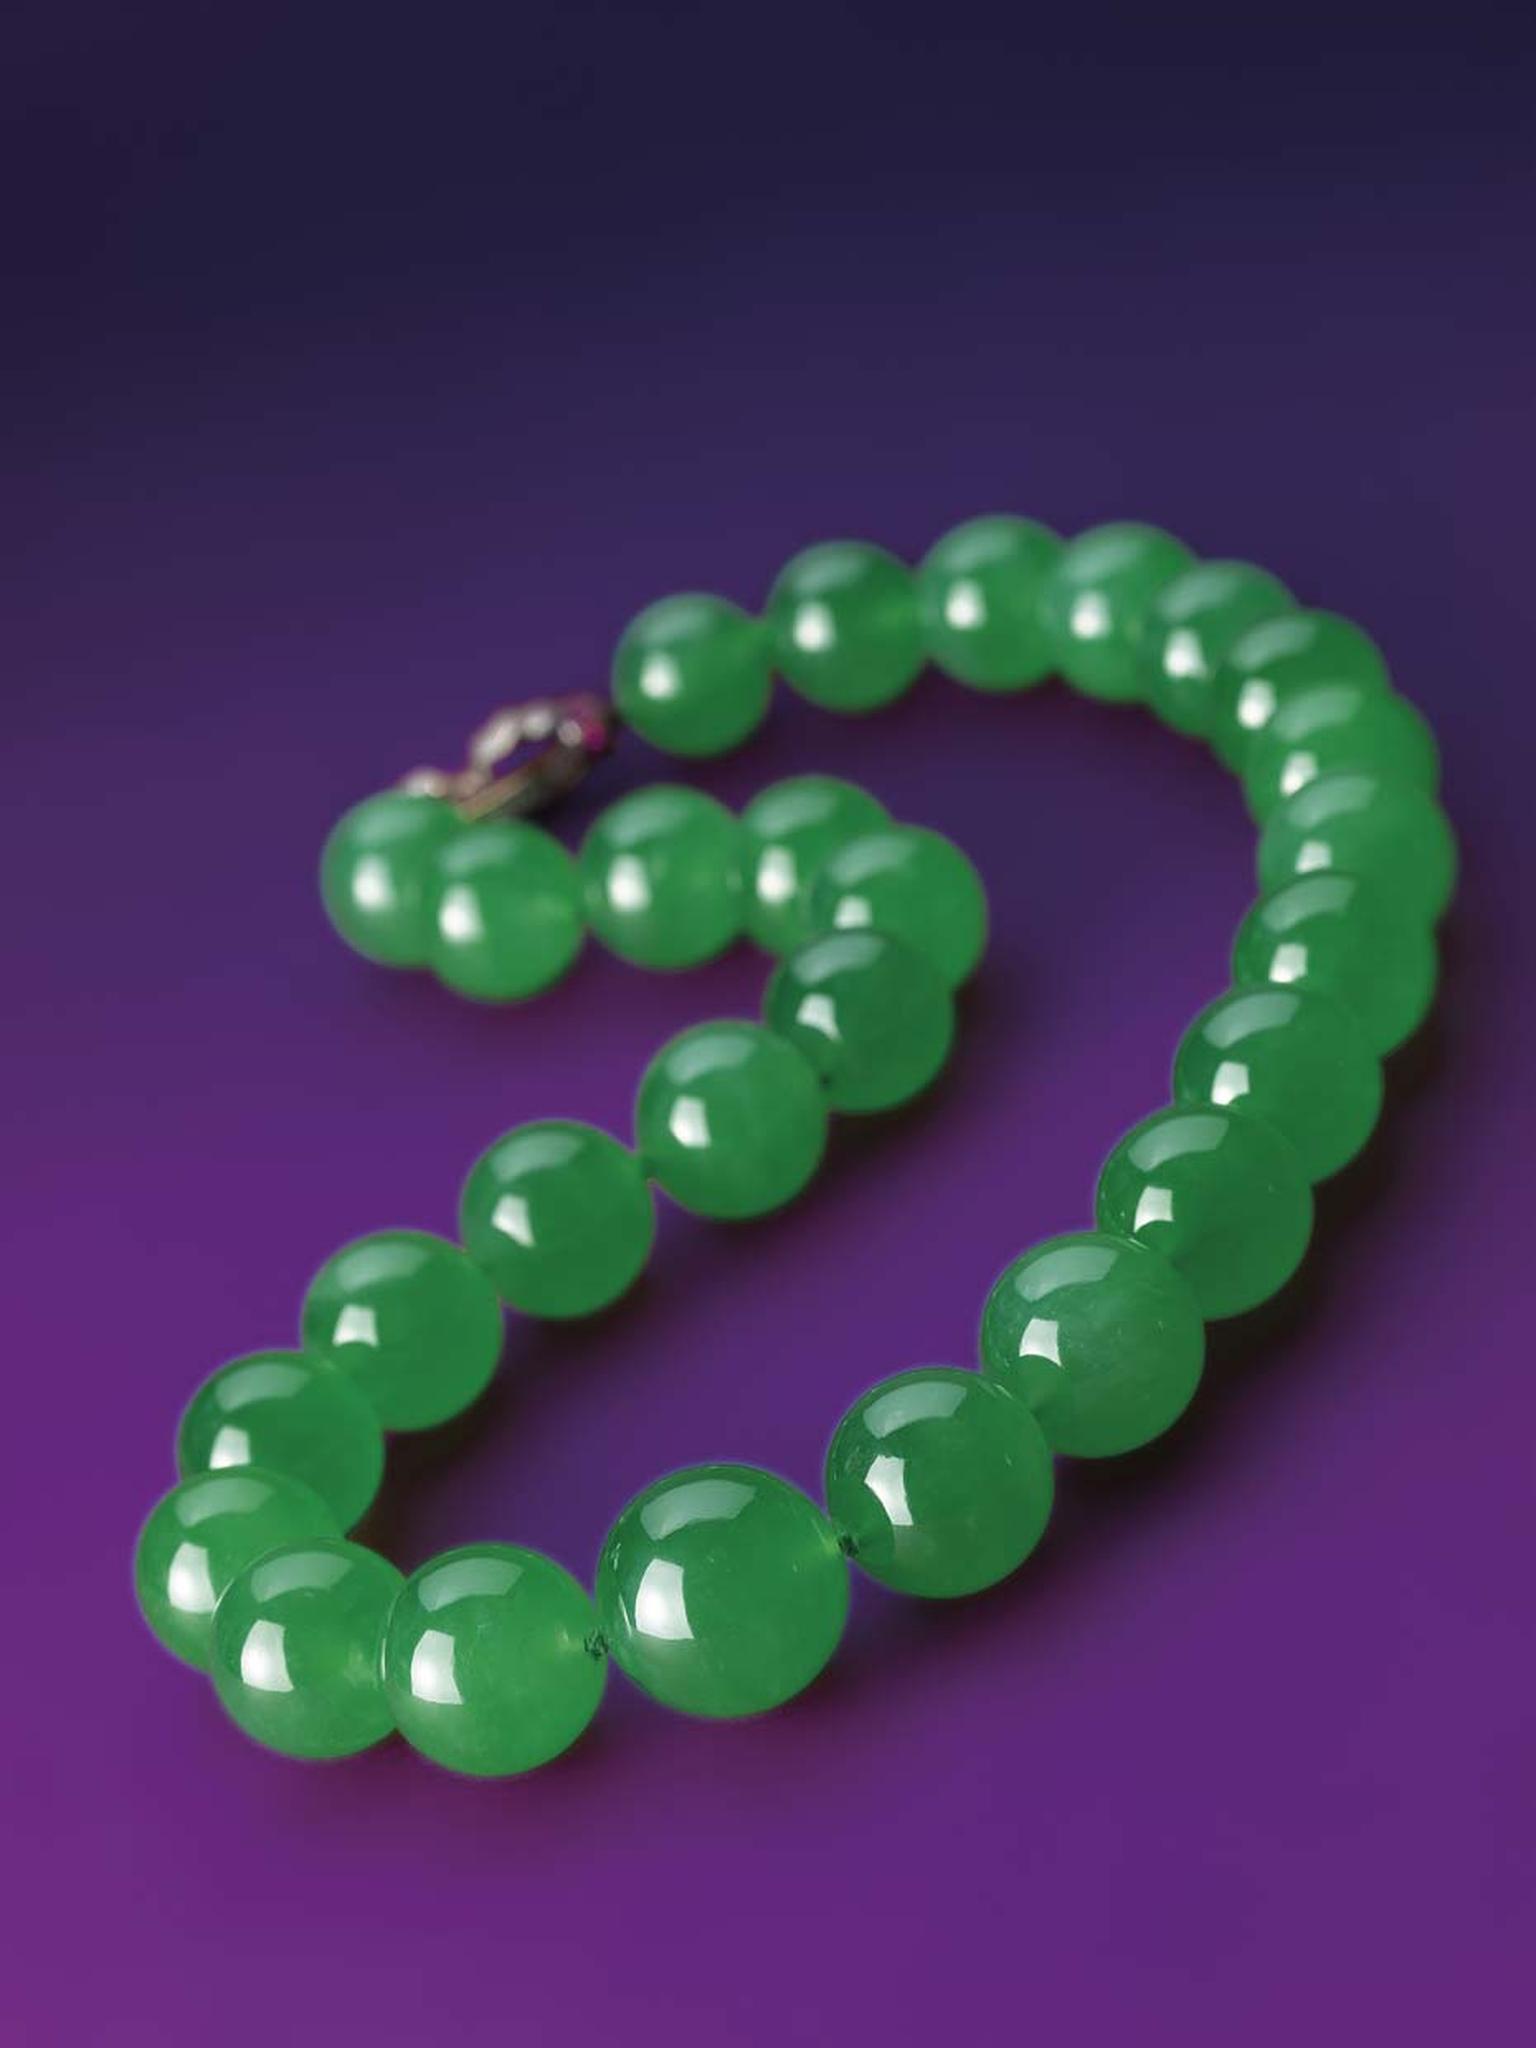 The Hutton-Mdivani necklace, estimated to sell for upwards of US$12.8 million, sold for a record-breaking US$27.44 million at Sotheby's Hong Kong on 6 April 2014.